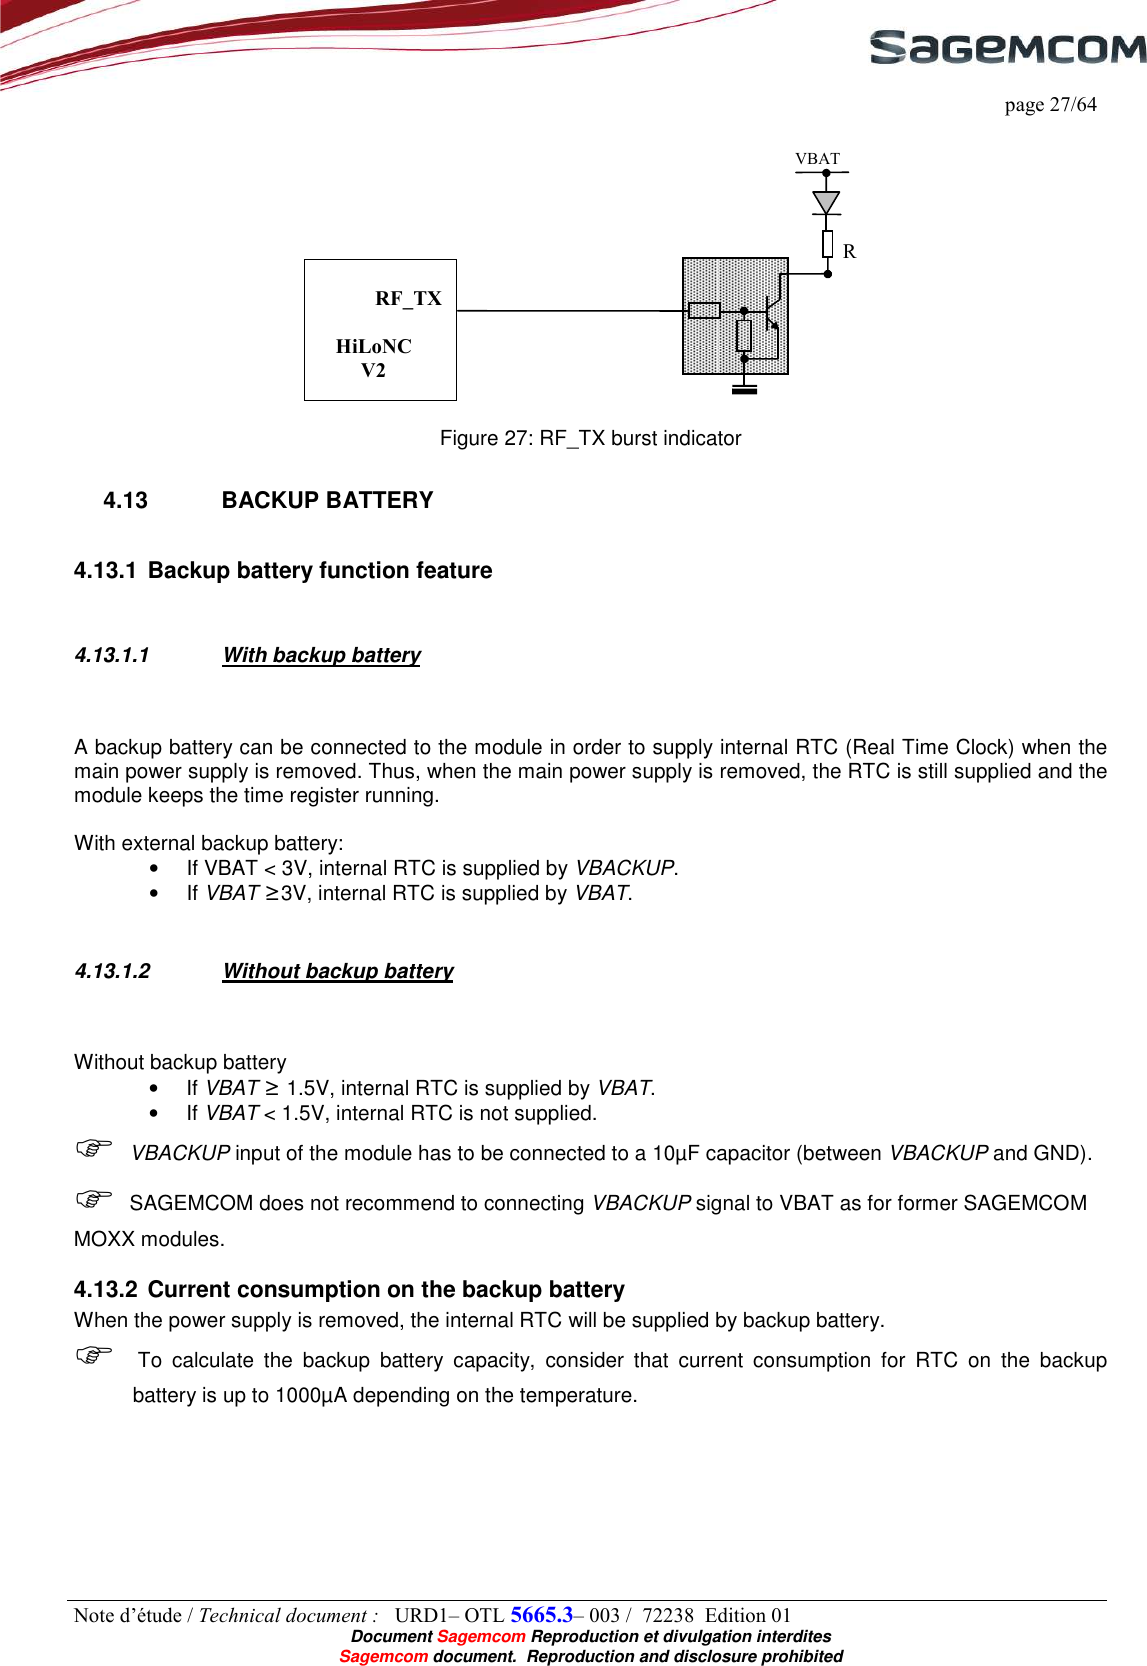     page 27/64 Note d’étude / Technical document :   URD1– OTL 5665.3– 003 /  72238  Edition 01  Document Sagemcom Reproduction et divulgation interdites Sagemcom document.  Reproduction and disclosure prohibited   Figure 27: RF_TX burst indicator 4.13  BACKUP BATTERY 4.13.1 Backup battery function feature  4.13.1.1  With backup battery  A backup battery can be connected to the module in order to supply internal RTC (Real Time Clock) when the main power supply is removed. Thus, when the main power supply is removed, the RTC is still supplied and the module keeps the time register running.  With external backup battery: •  If VBAT &lt; 3V, internal RTC is supplied by VBACKUP. •  If VBAT ≥3V, internal RTC is supplied by VBAT.  4.13.1.2  Without backup battery  Without backup battery •  If VBAT ≥ 1.5V, internal RTC is supplied by VBAT. •  If VBAT &lt; 1.5V, internal RTC is not supplied.  VBACKUP input of the module has to be connected to a 10µF capacitor (between VBACKUP and GND).  SAGEMCOM does not recommend to connecting VBACKUP signal to VBAT as for former SAGEMCOM MOXX modules. 4.13.2 Current consumption on the backup battery When the power supply is removed, the internal RTC will be supplied by backup battery.  To  calculate  the  backup  battery  capacity,  consider  that  current  consumption  for  RTC  on  the  backup battery is up to 1000µA depending on the temperature.  RF_TXHiLoNC V2 VBAT R 